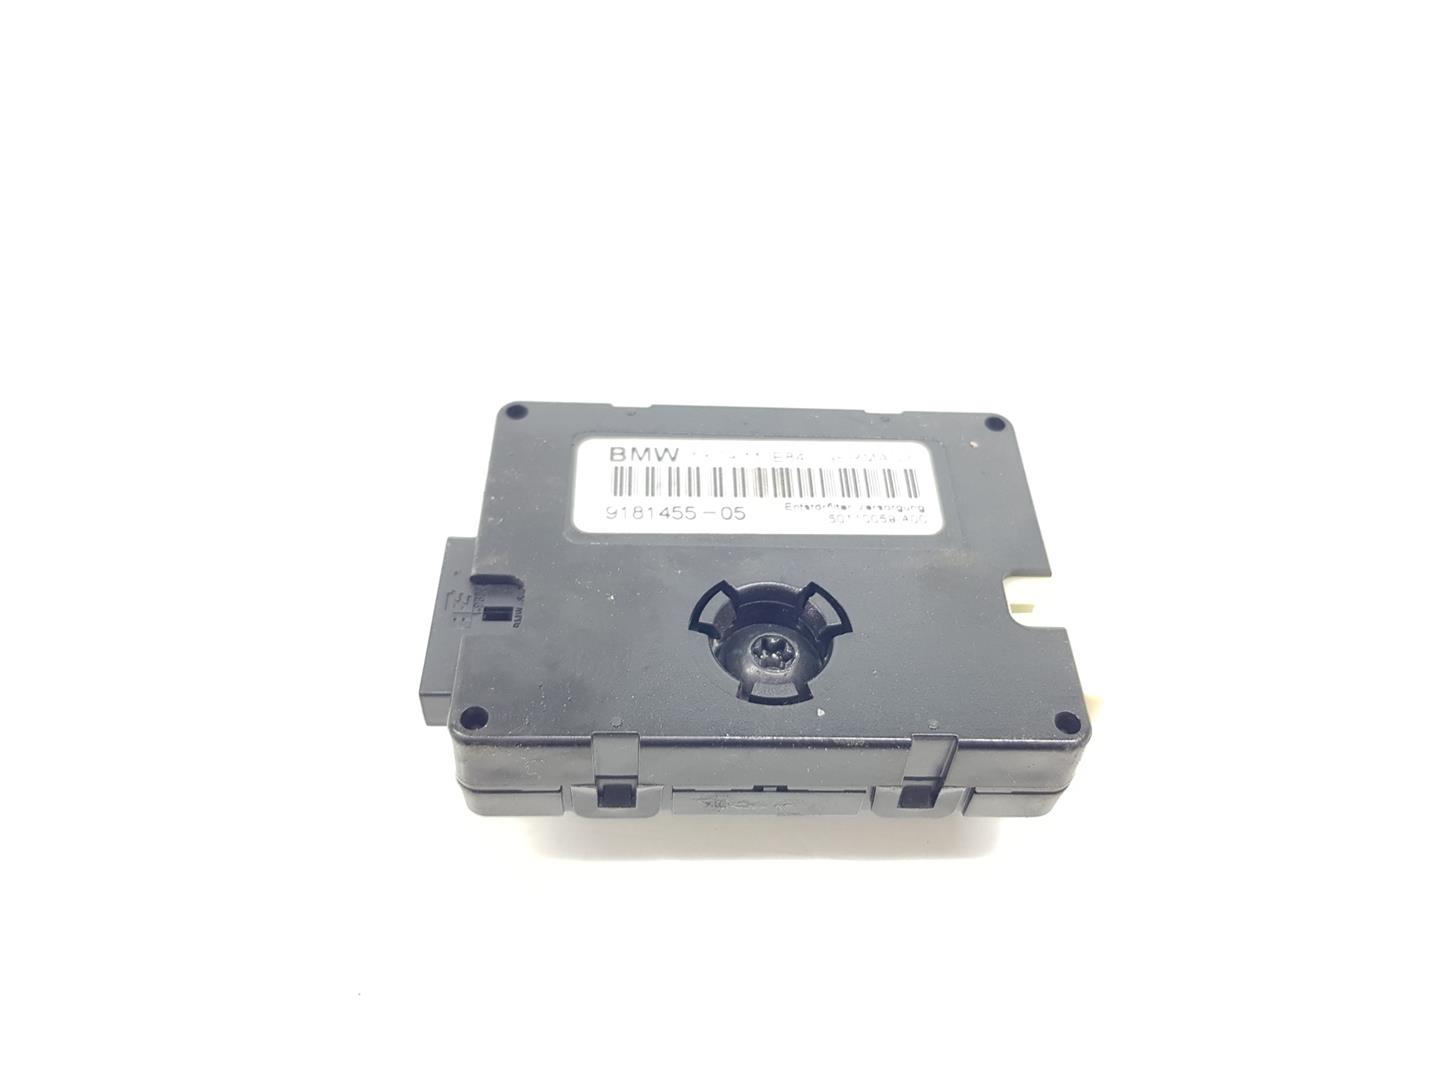 BMW X1 E84 (2009-2015) Other Control Units 9181455, 65209181455 24250701